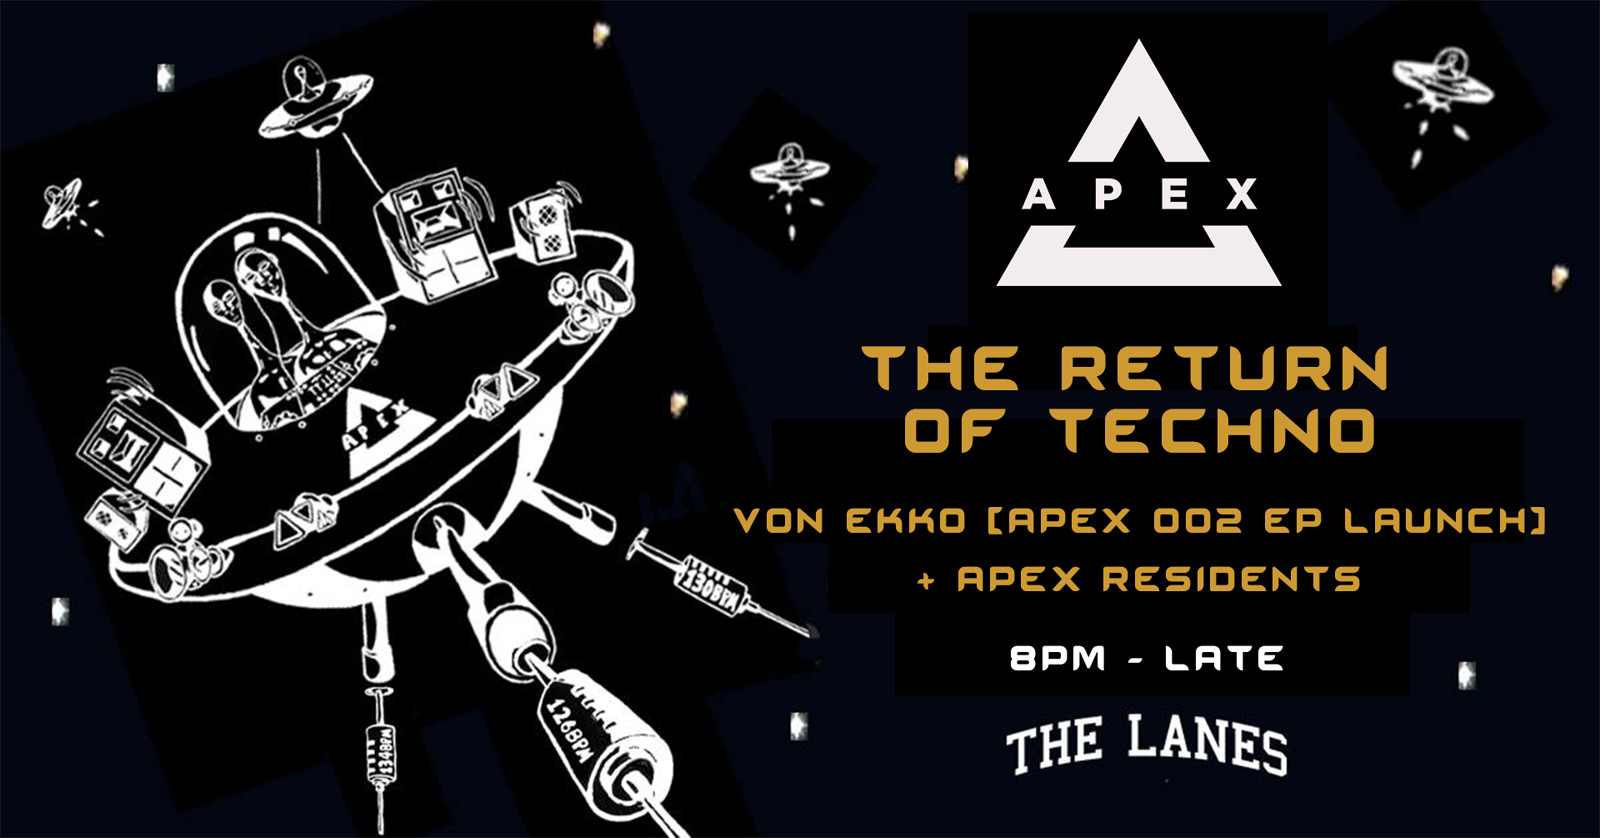 Apex: The Return Of Techno at The Lanes